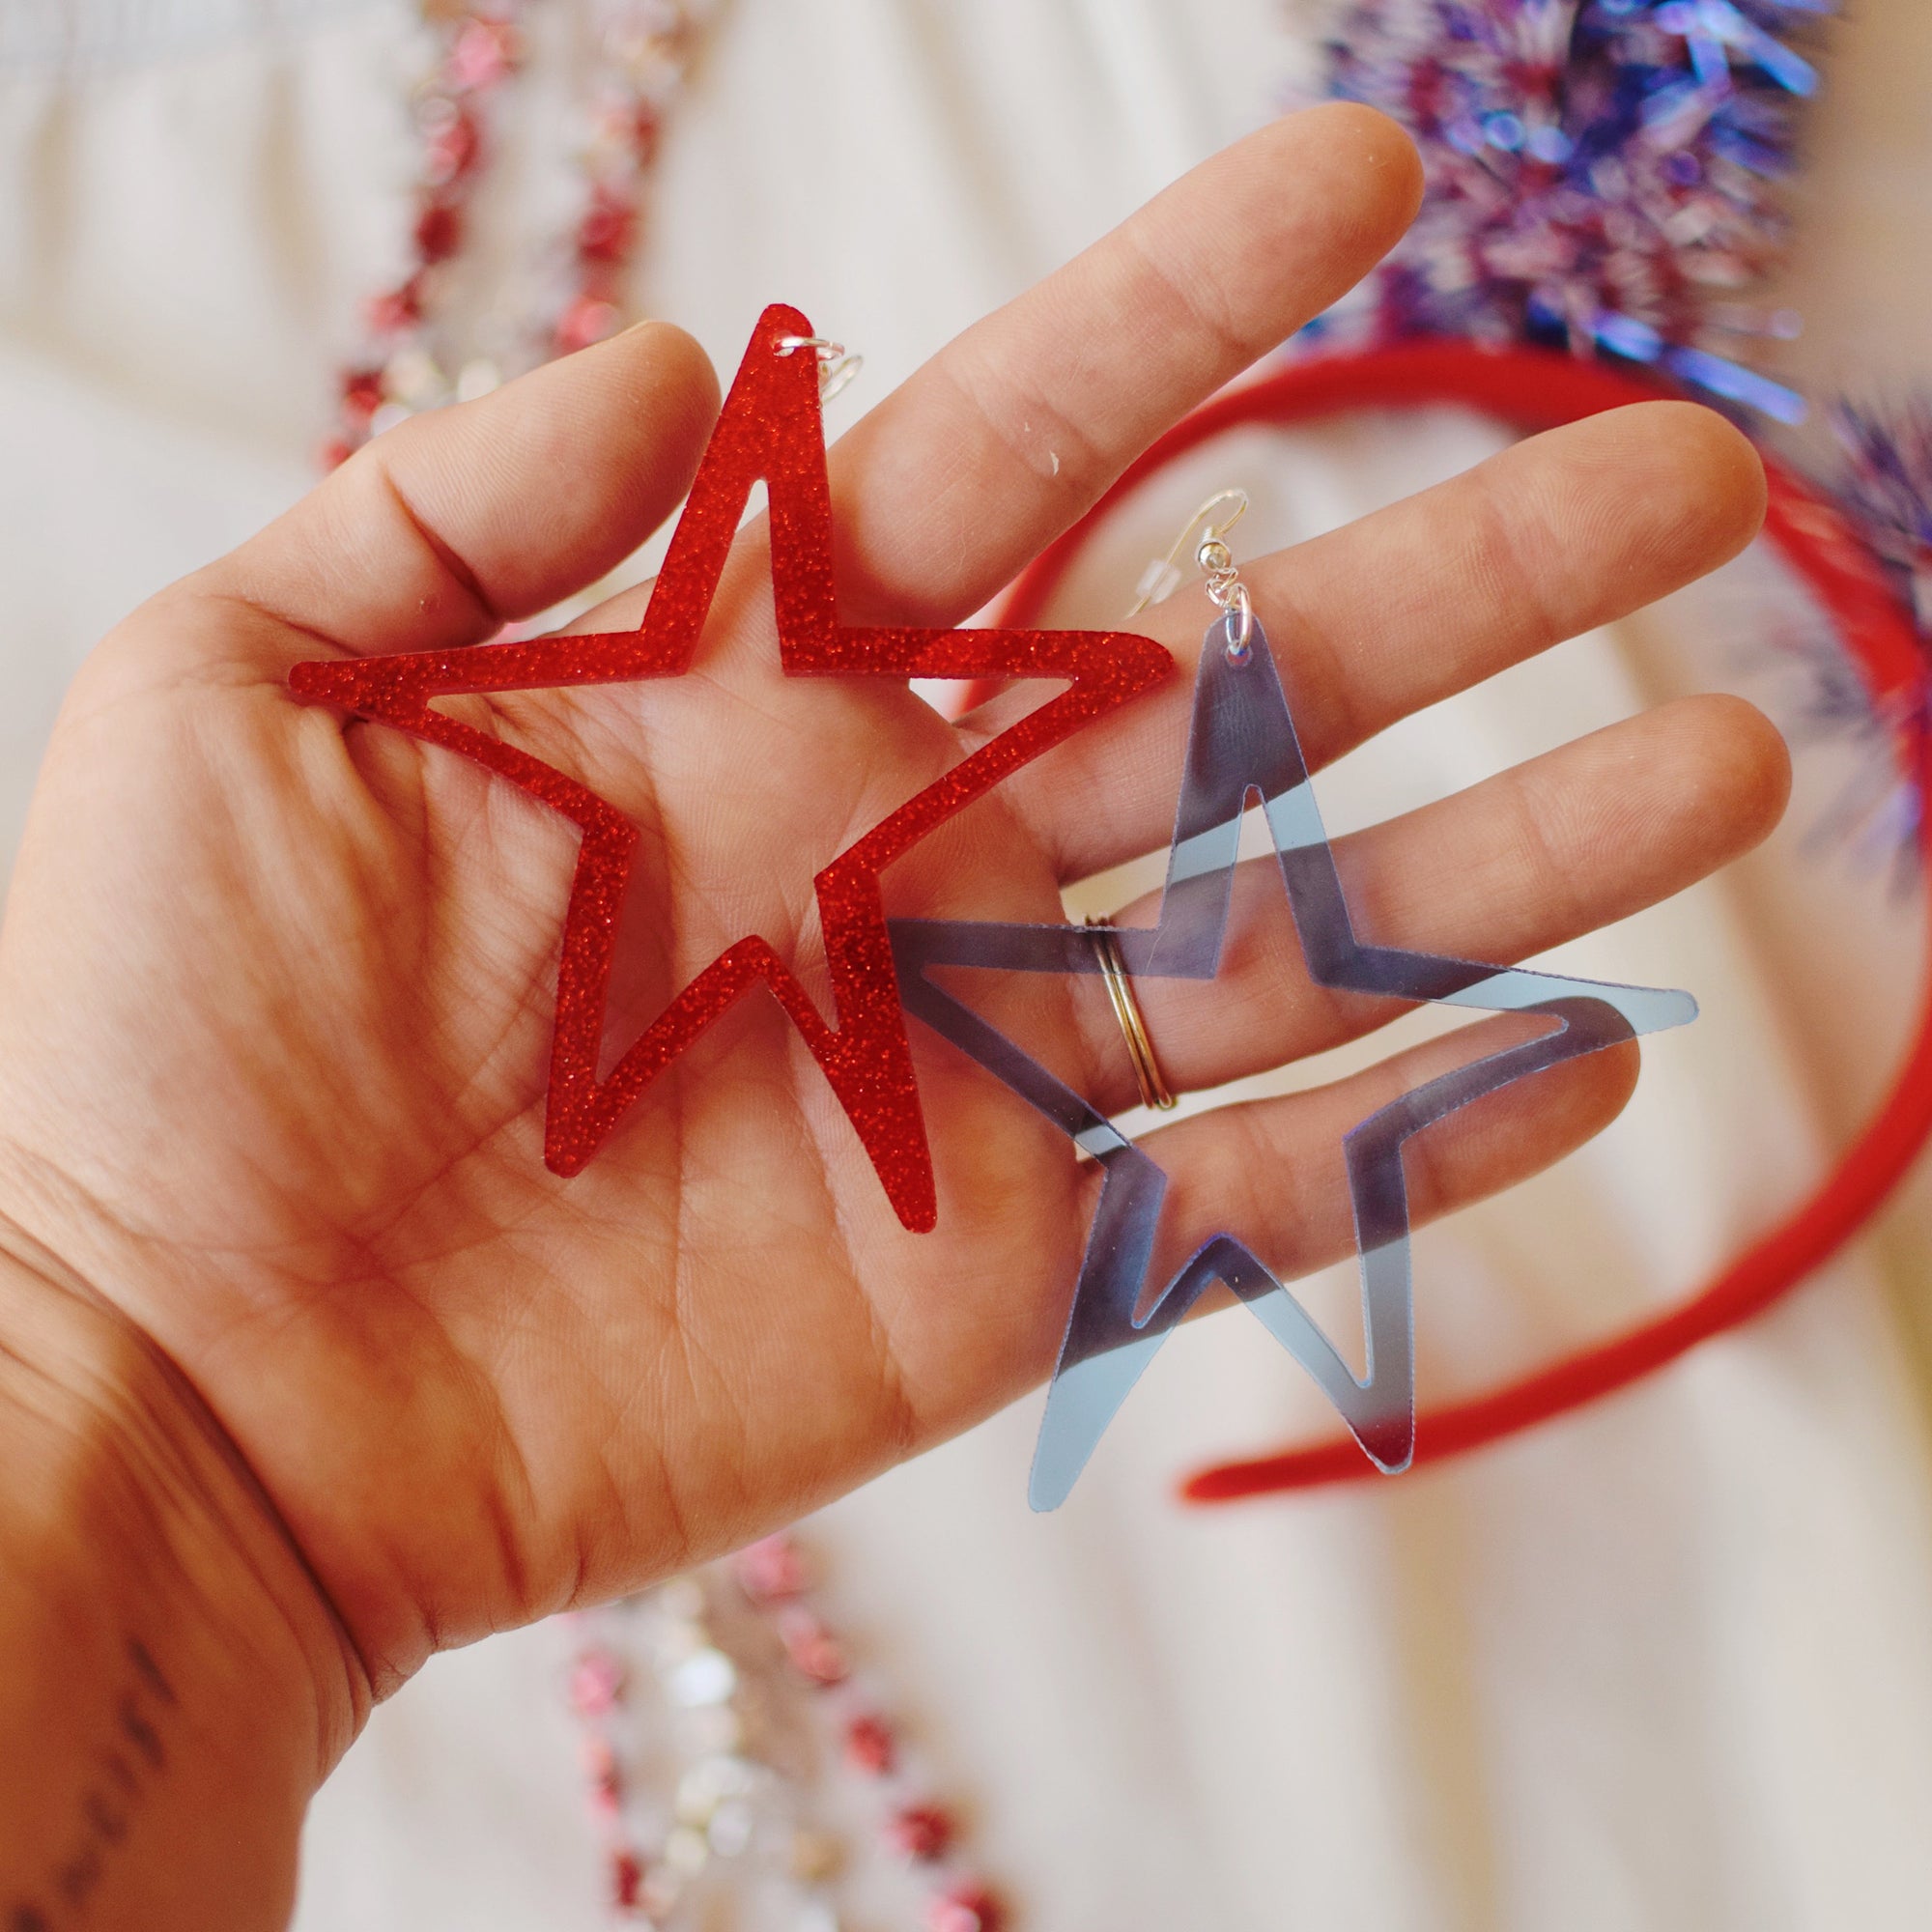 Earrings - 4th of July - Big Star Outlines (Combo) - Sparkle Red/Translucent Blue